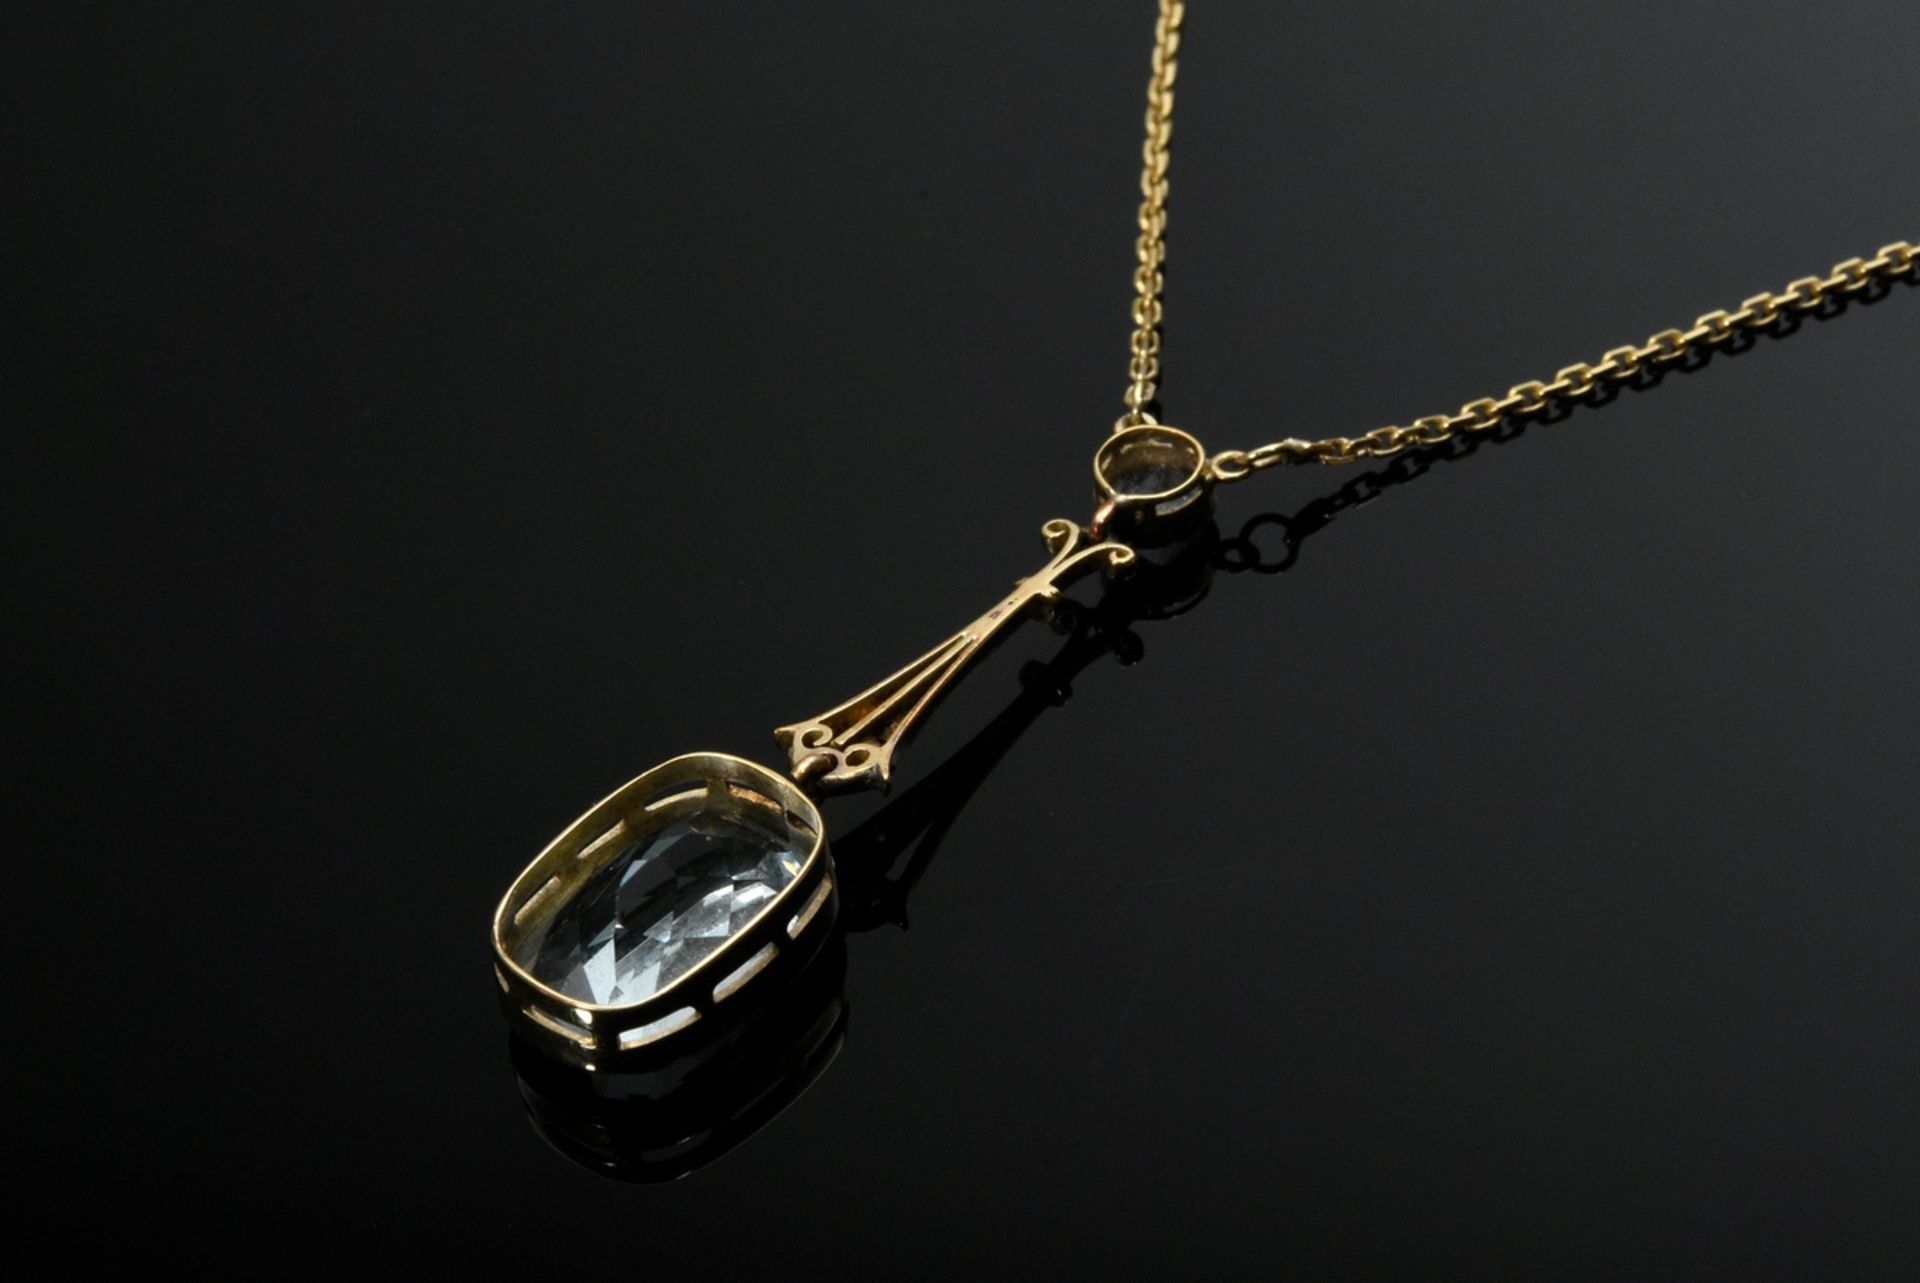 Delicate yellow gold 585 necklace of aquamarine art nouveau pendant (2 small pearls missing) on mod - Image 2 of 3